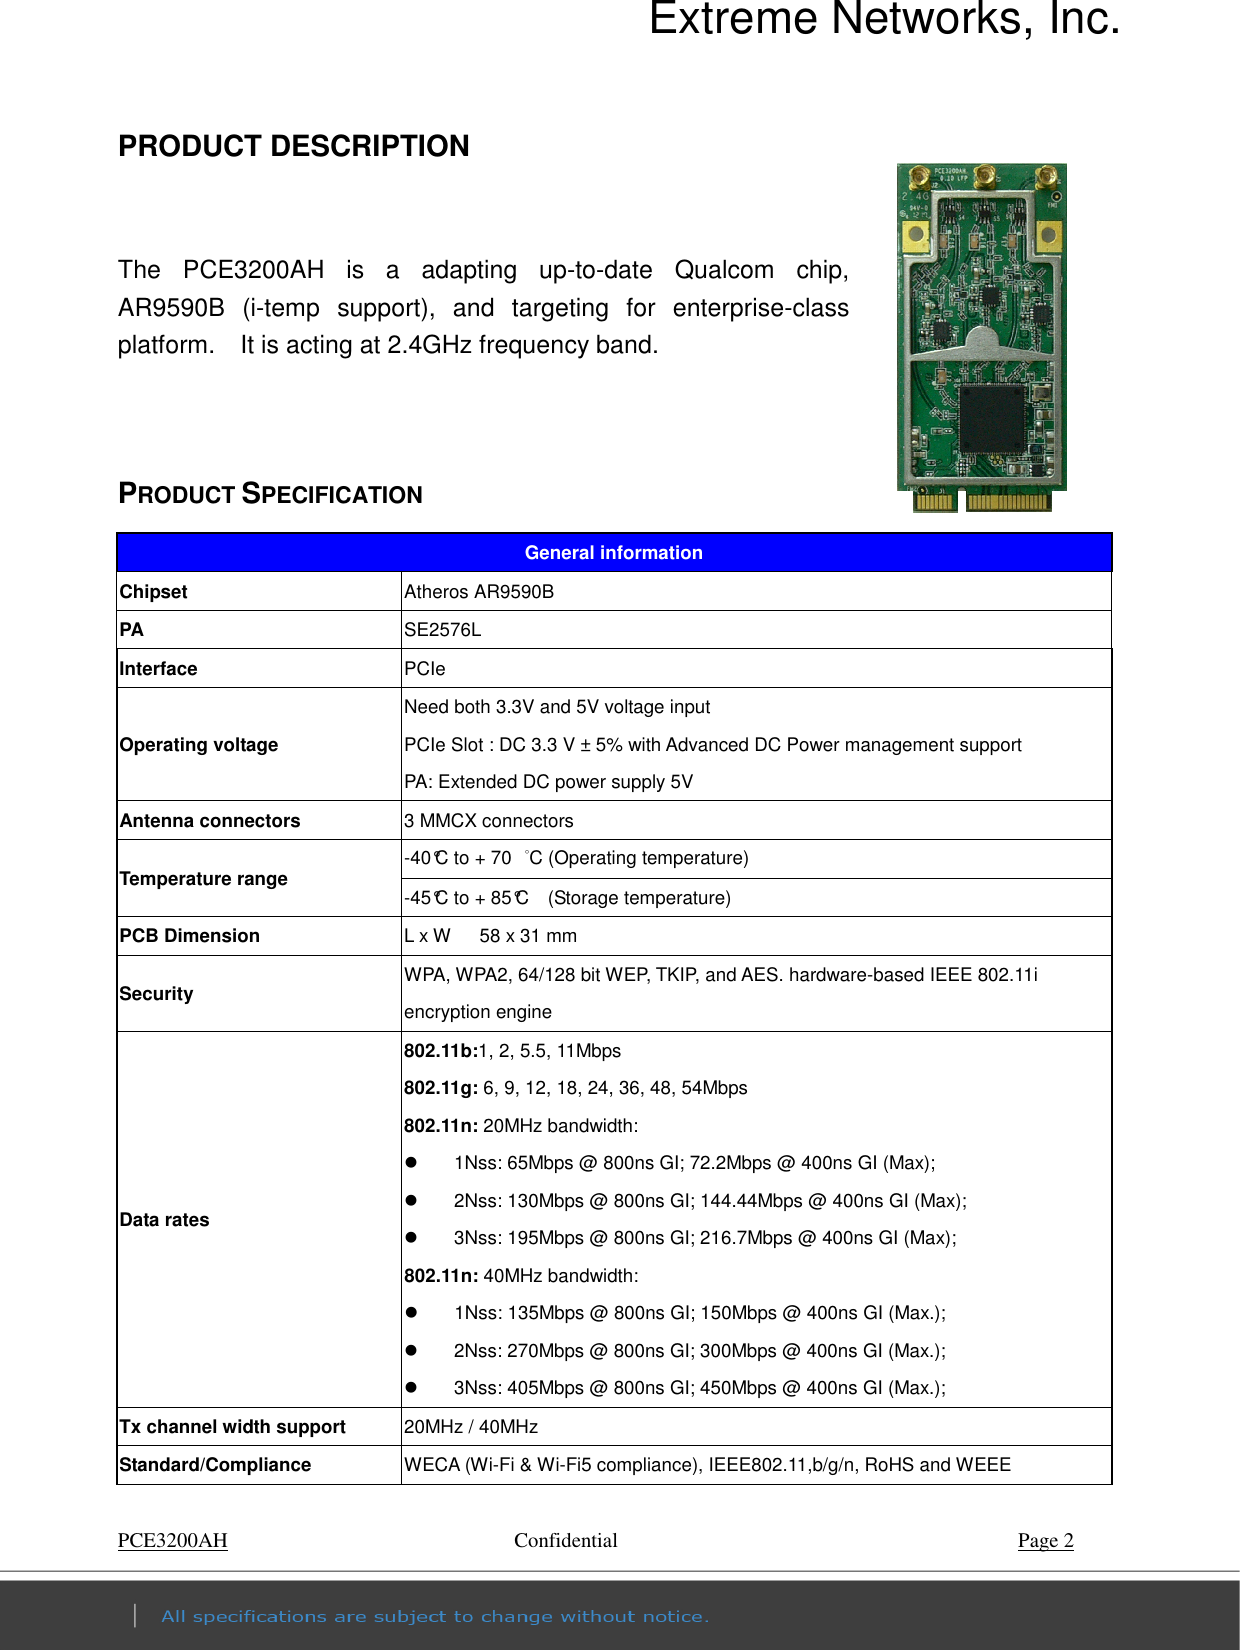 Extreme Networks, Inc. PCE3200AH        Confidential    Page 2 PRODUCT DESCRIPTION                        The  PCE3200AH  is  a  adapting  up-to-date  Qualcom  chip, AR9590B  (i-temp  support),  and  targeting  for  enterprise-class platform.    It is acting at 2.4GHz frequency band.       PRODUCT SPECIFICATION General information Chipset  Atheros AR9590B PA  SE2576L Interface  PCIe Operating voltage Need both 3.3V and 5V voltage input PCIe Slot : DC 3.3 V ± 5% with Advanced DC Power management support   PA: Extended DC power supply 5V Antenna connectors  3 MMCX connectors   Temperature range  -40°C to + 70  °C (Operating temperature)   -45°C to + 85°C    (Storage temperature)   PCB Dimension  L x W      58 x 31 mm Security  WPA, WPA2, 64/128 bit WEP, TKIP, and AES. hardware-based IEEE 802.11i encryption engine   Data rates 802.11b:1, 2, 5.5, 11Mbps 802.11g: 6, 9, 12, 18, 24, 36, 48, 54Mbps 802.11n: 20MHz bandwidth:   1Nss: 65Mbps @ 800ns GI; 72.2Mbps @ 400ns GI (Max);   2Nss: 130Mbps @ 800ns GI; 144.44Mbps @ 400ns GI (Max);   3Nss: 195Mbps @ 800ns GI; 216.7Mbps @ 400ns GI (Max); 802.11n: 40MHz bandwidth:   1Nss: 135Mbps @ 800ns GI; 150Mbps @ 400ns GI (Max.);   2Nss: 270Mbps @ 800ns GI; 300Mbps @ 400ns GI (Max.);   3Nss: 405Mbps @ 800ns GI; 450Mbps @ 400ns GI (Max.); Tx channel width support  20MHz / 40MHz Standard/Compliance  WECA (Wi-Fi &amp; Wi-Fi5 compliance), IEEE802.11,b/g/n, RoHS and WEEE 